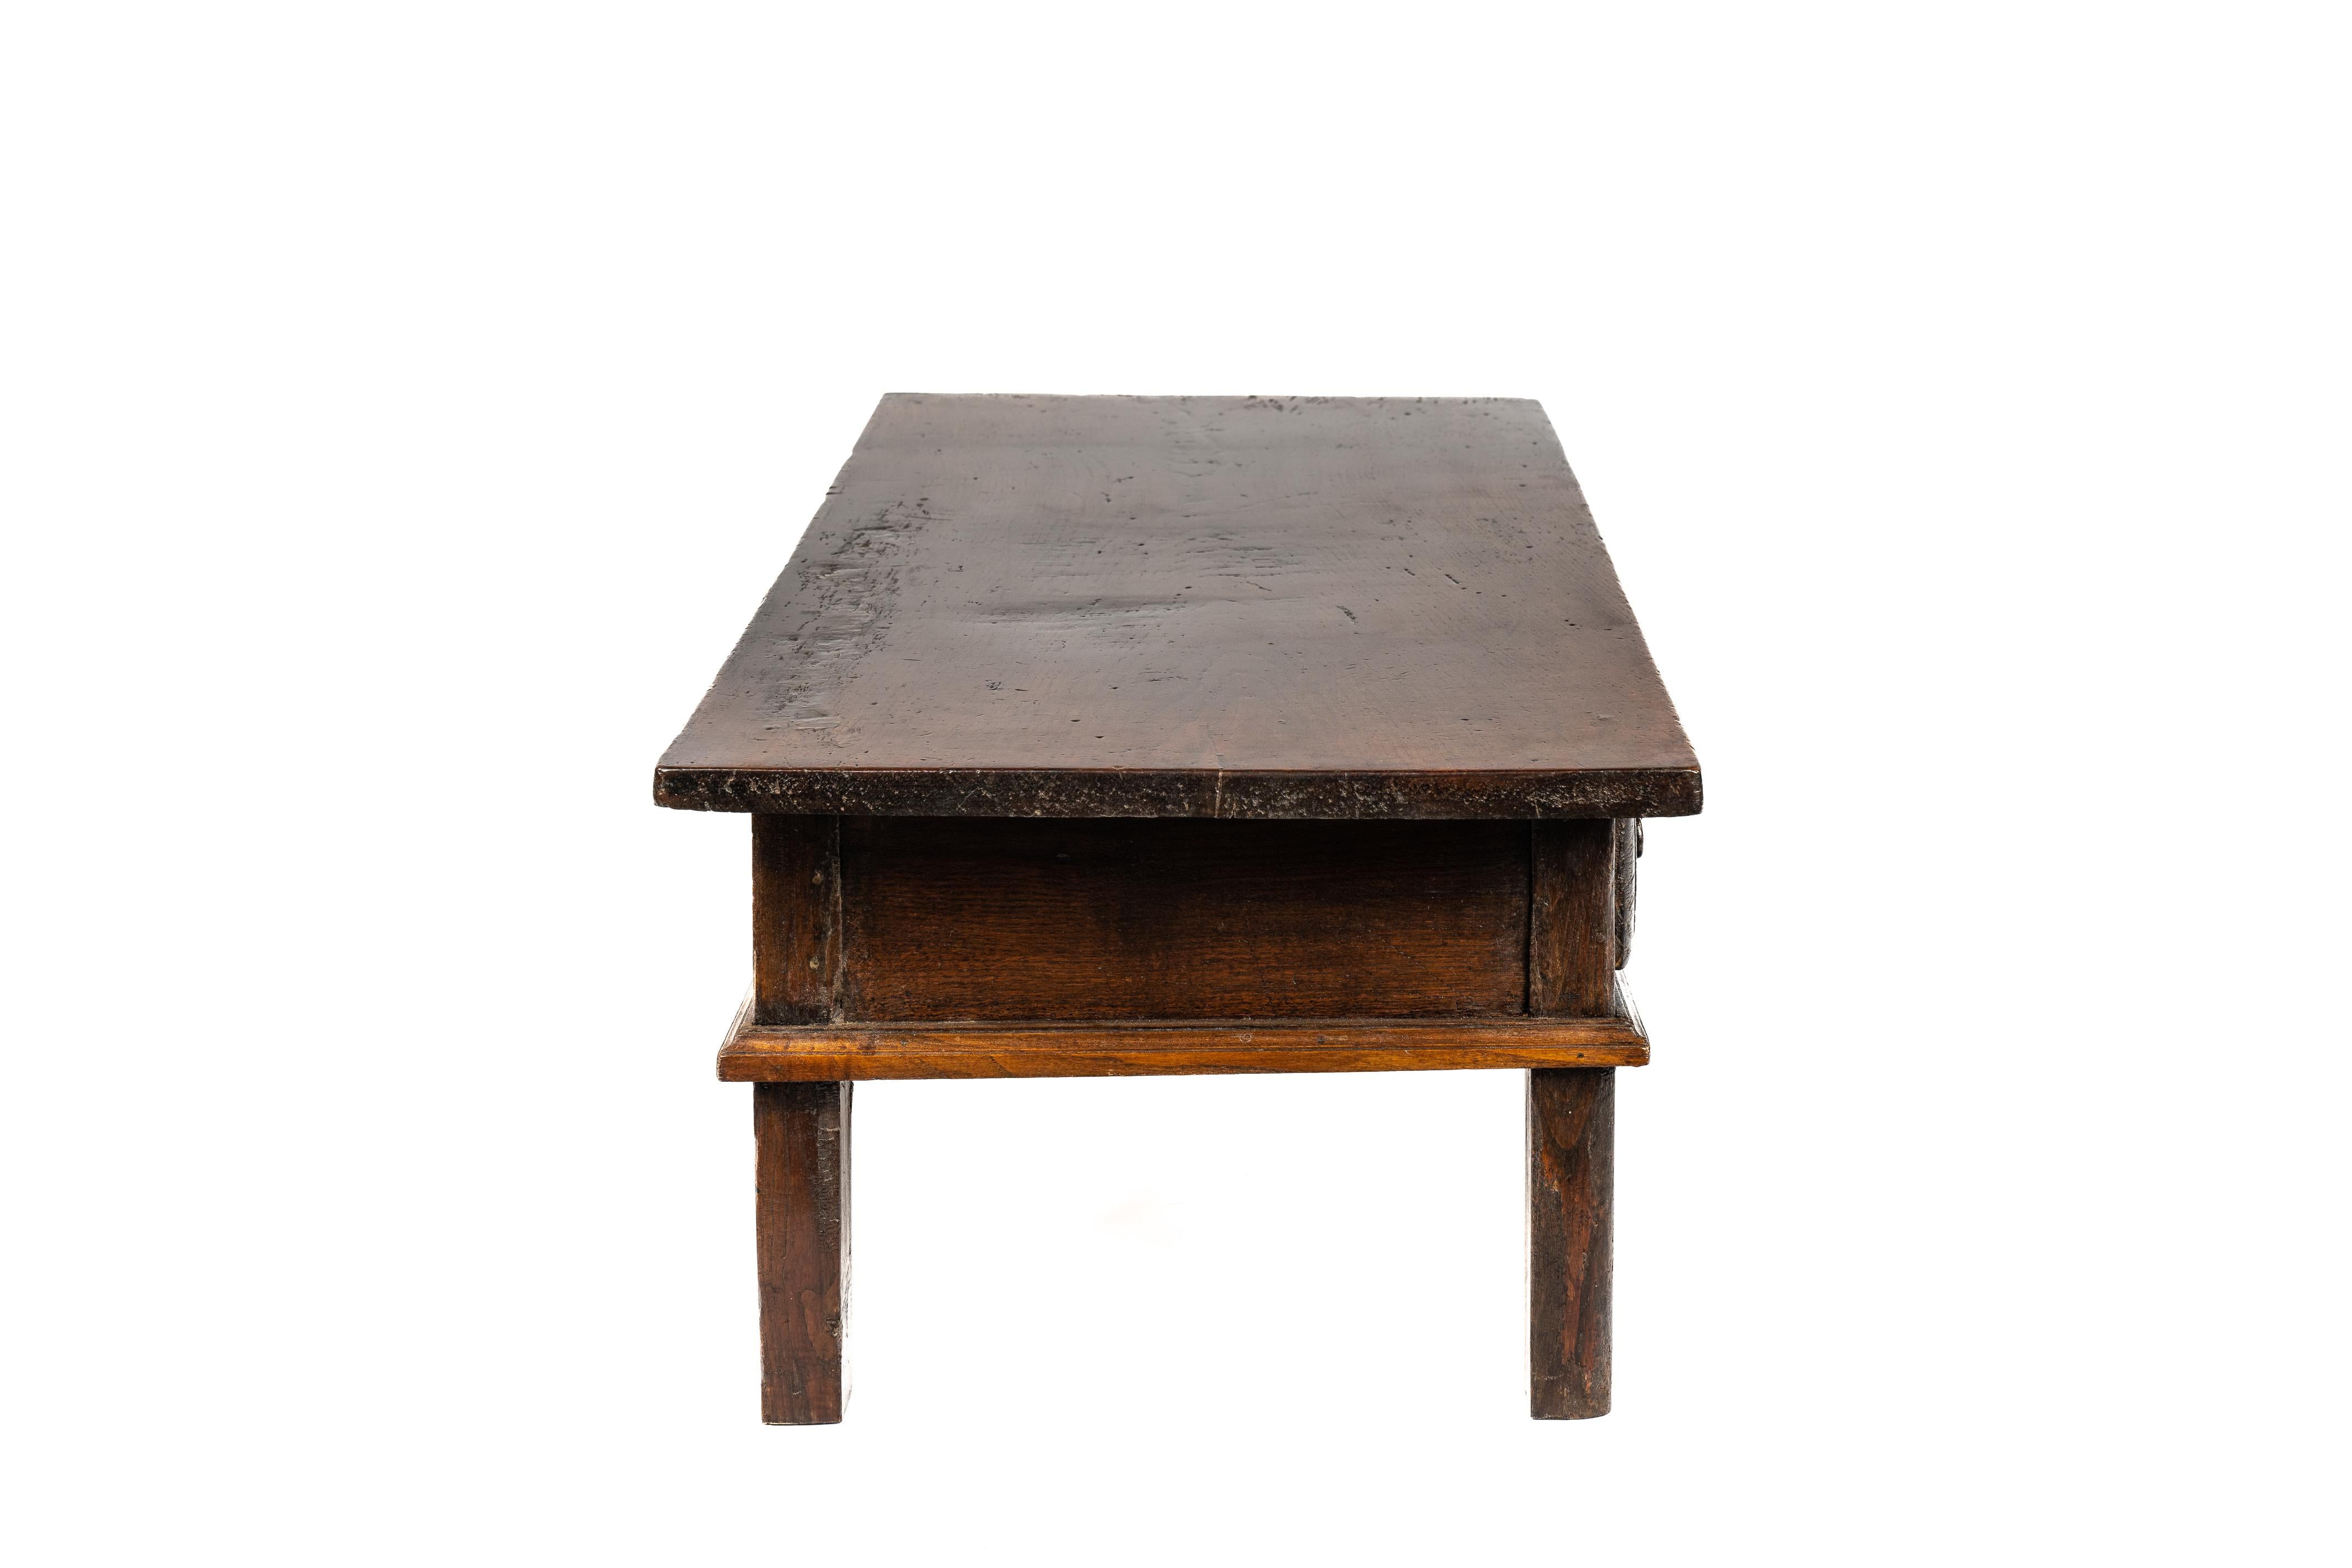 Steel Antique Early 19th Century Rustic Spanish Warm Dark Brown Chestnut Coffee Table For Sale